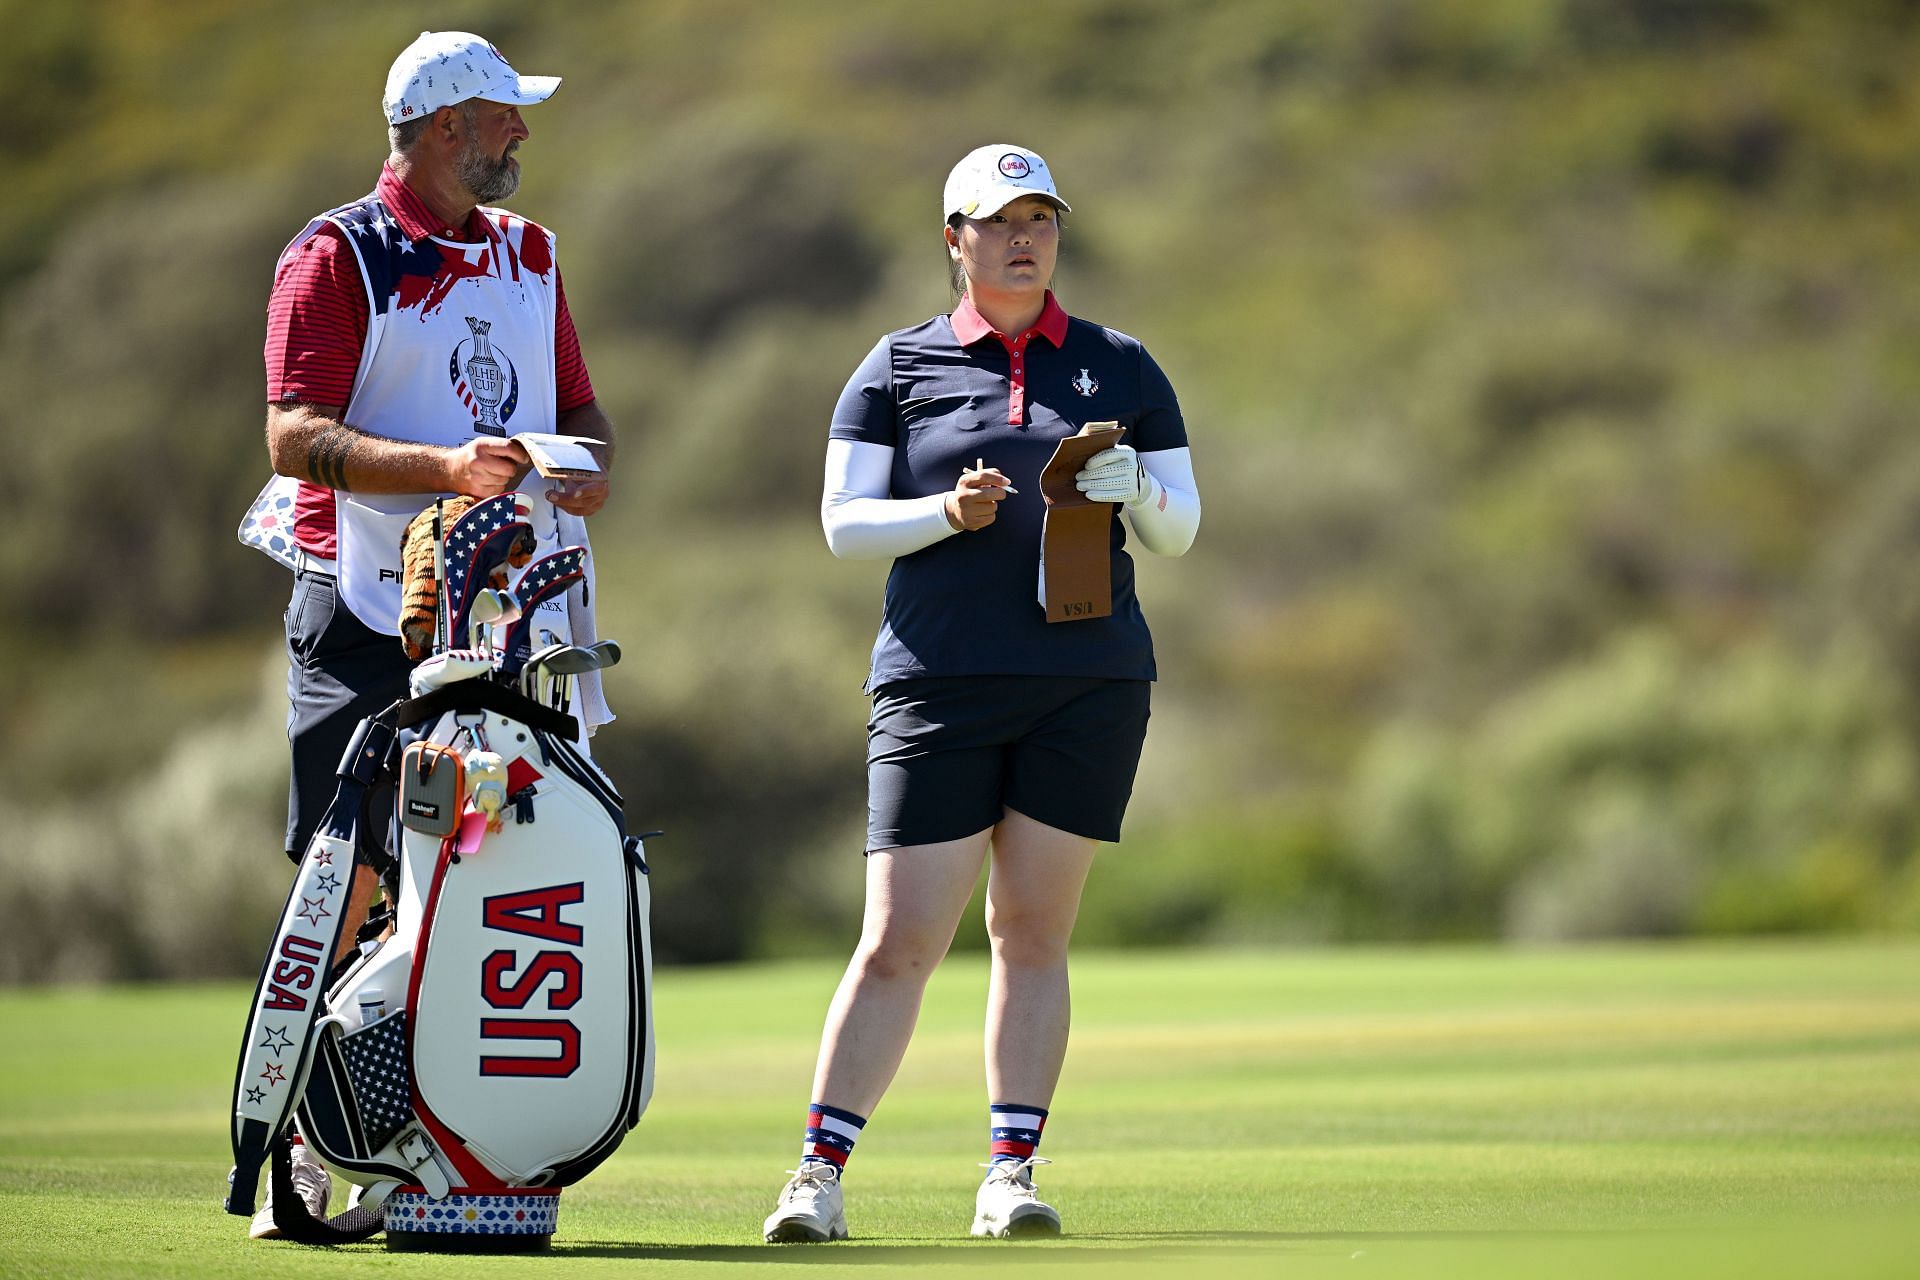 The Solheim Cup - Day Three